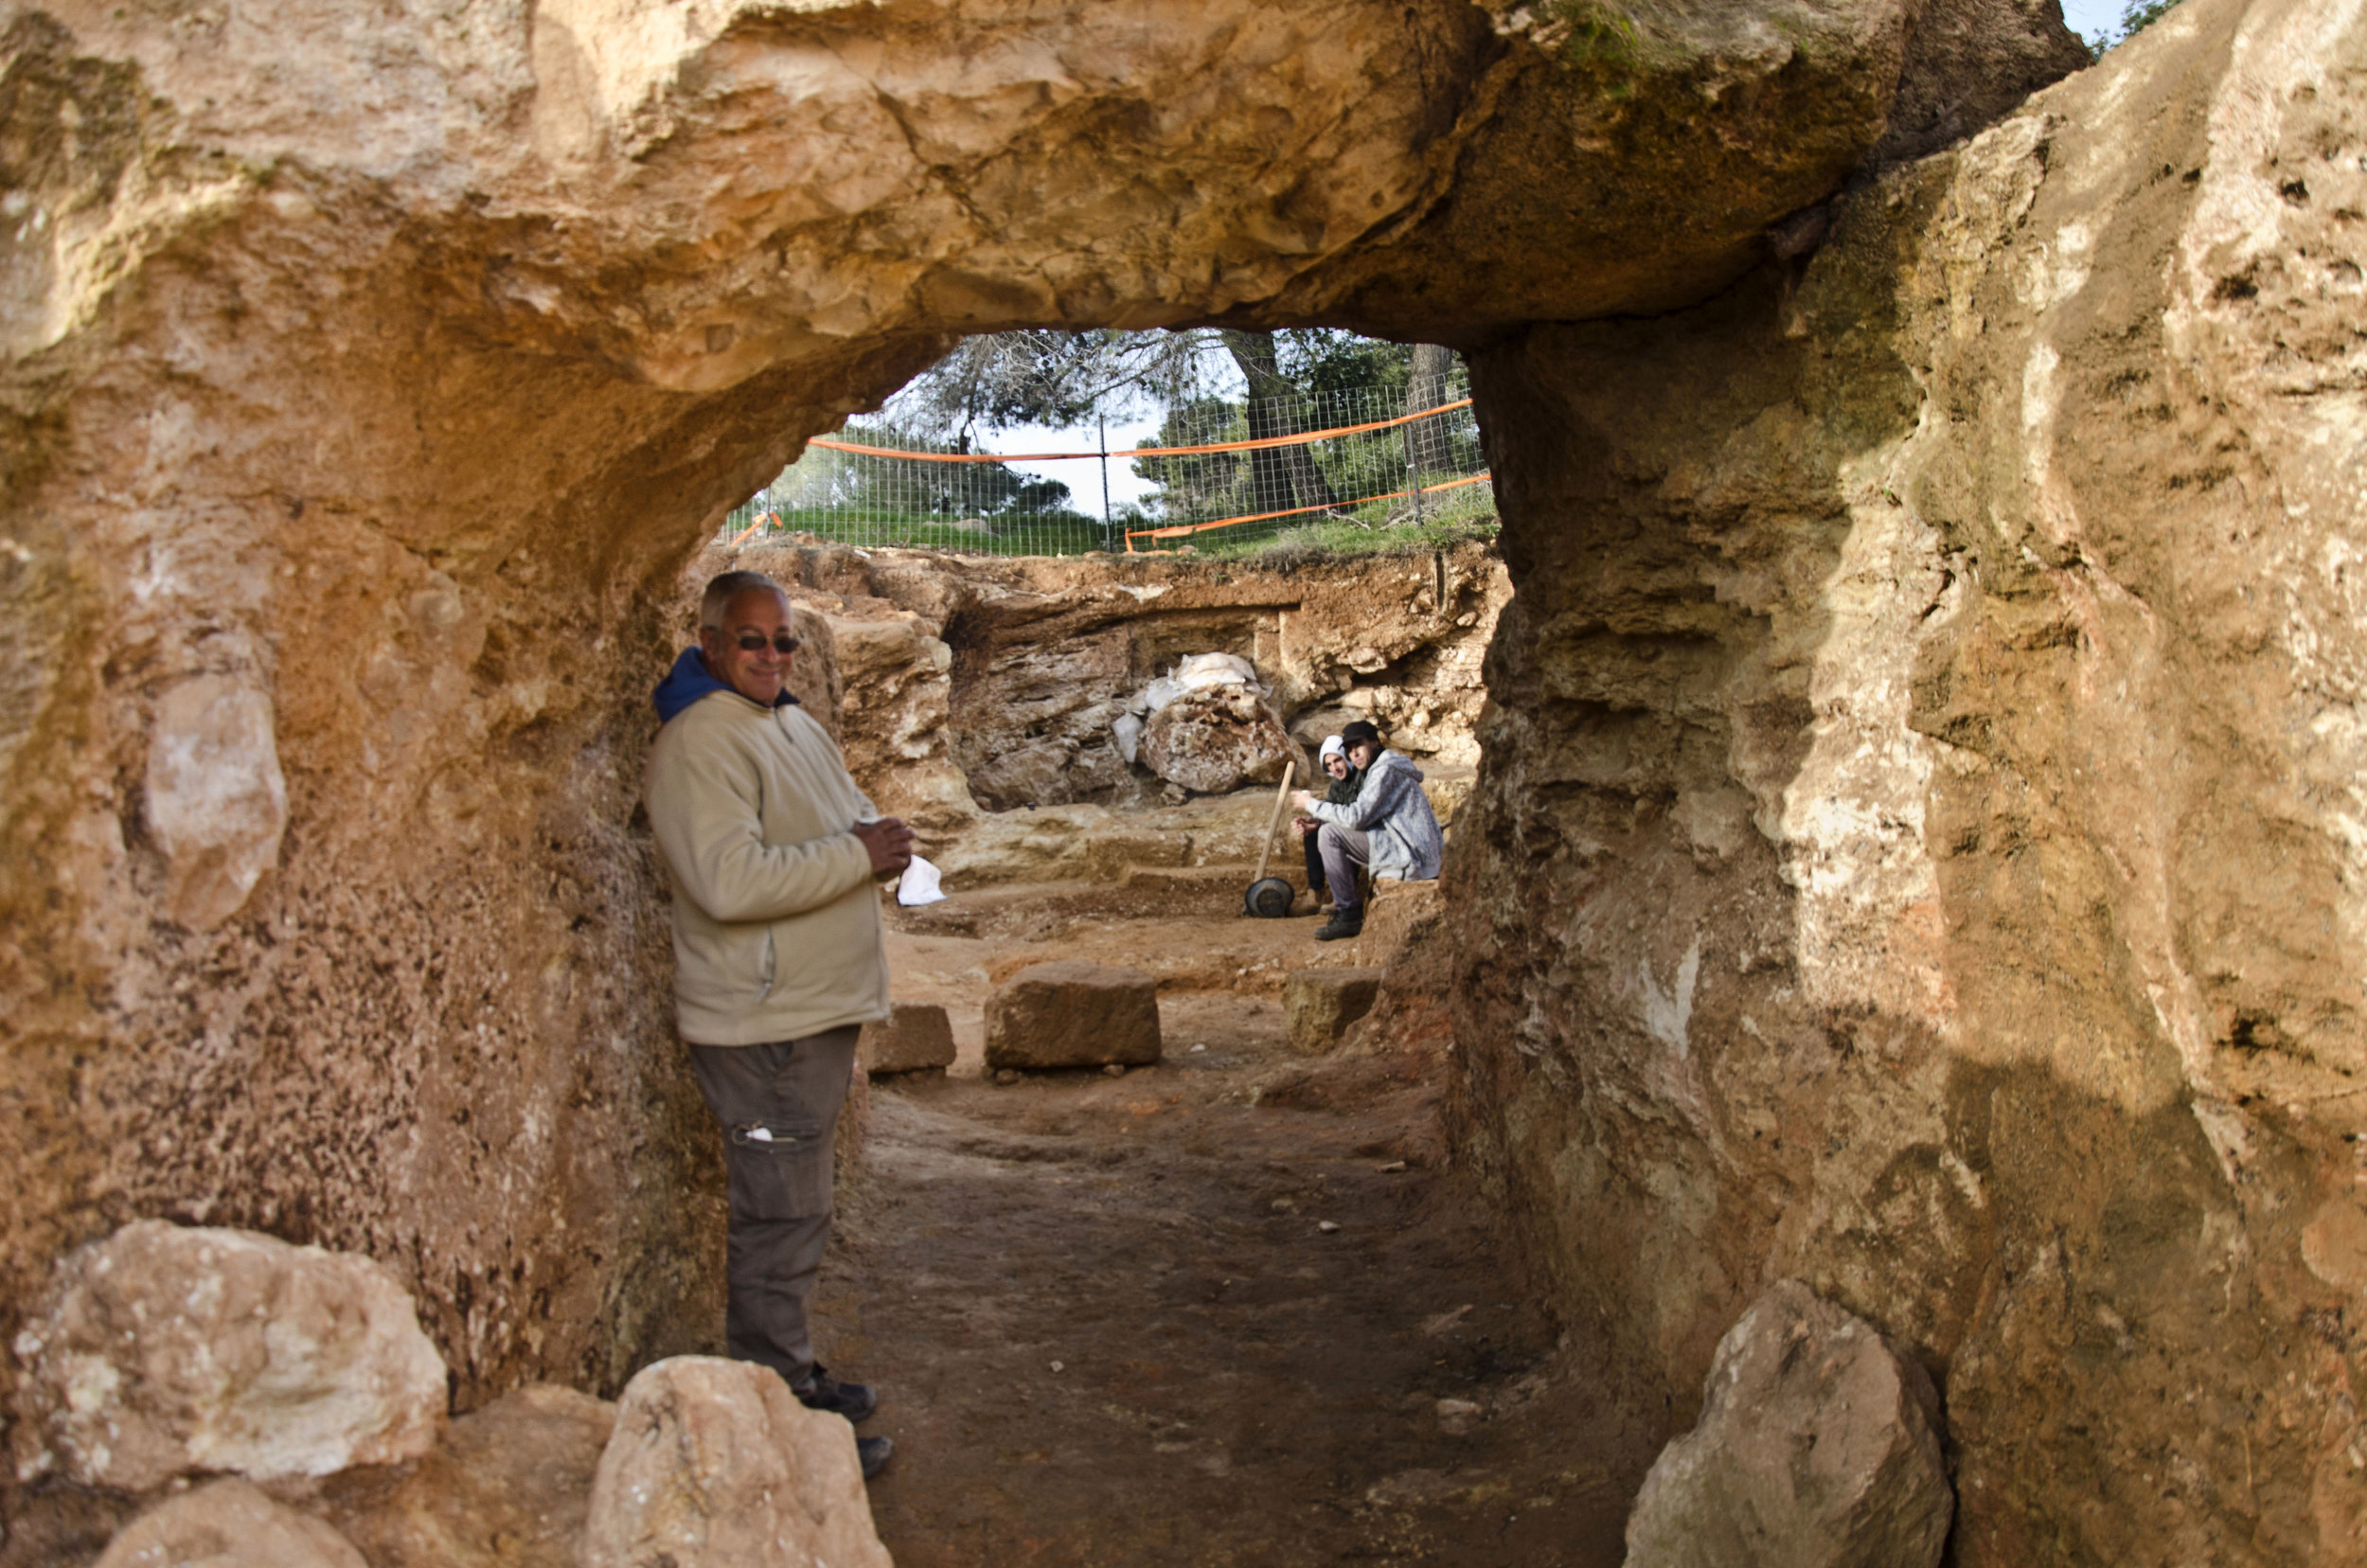 Extravagant burial estate from the Second Temple Period